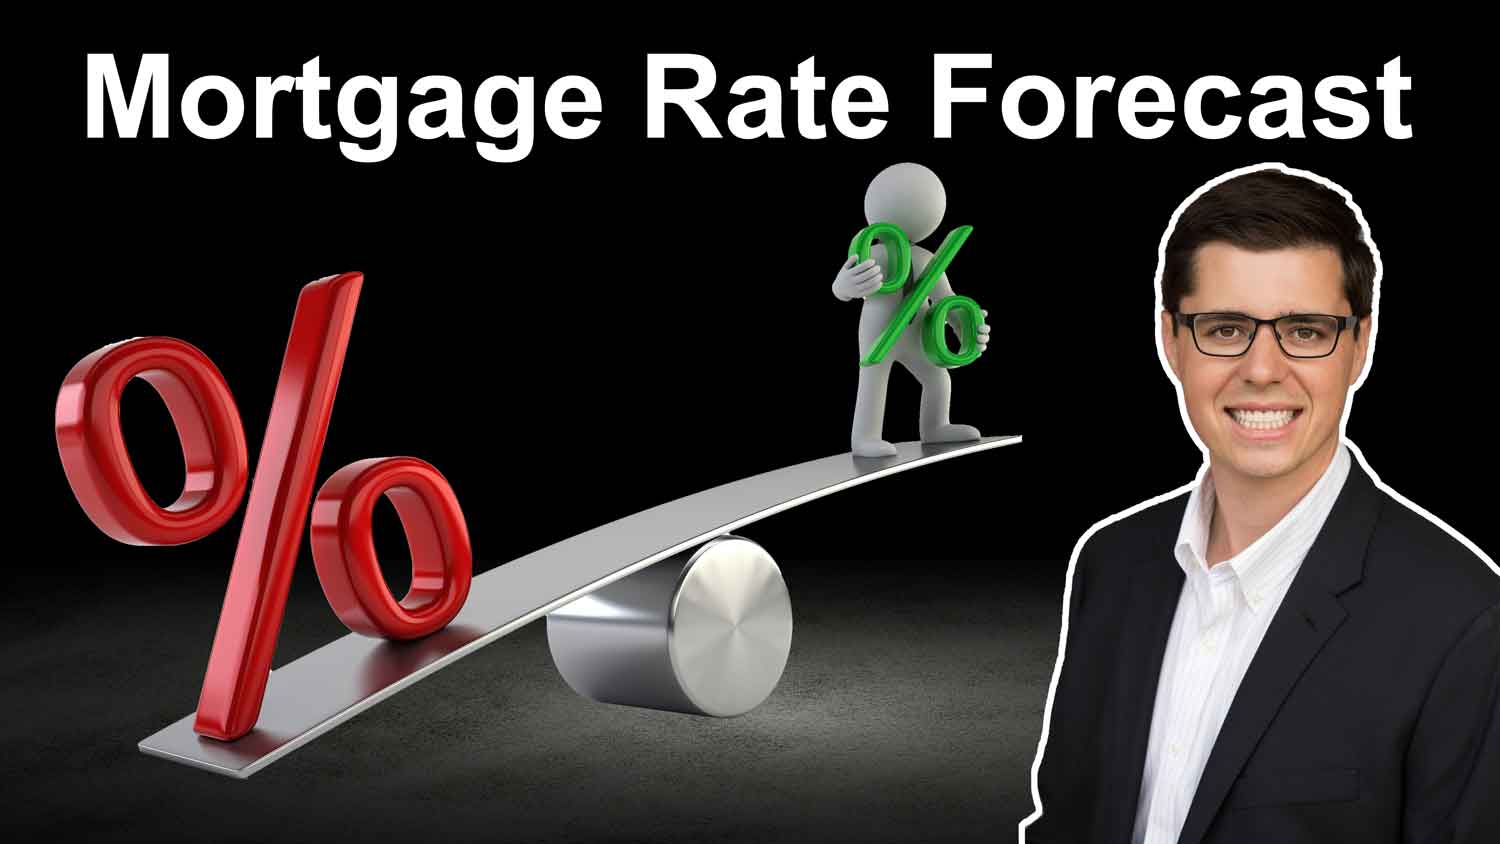 Mortgage Interest Rate Forecast for 2022 & 2023